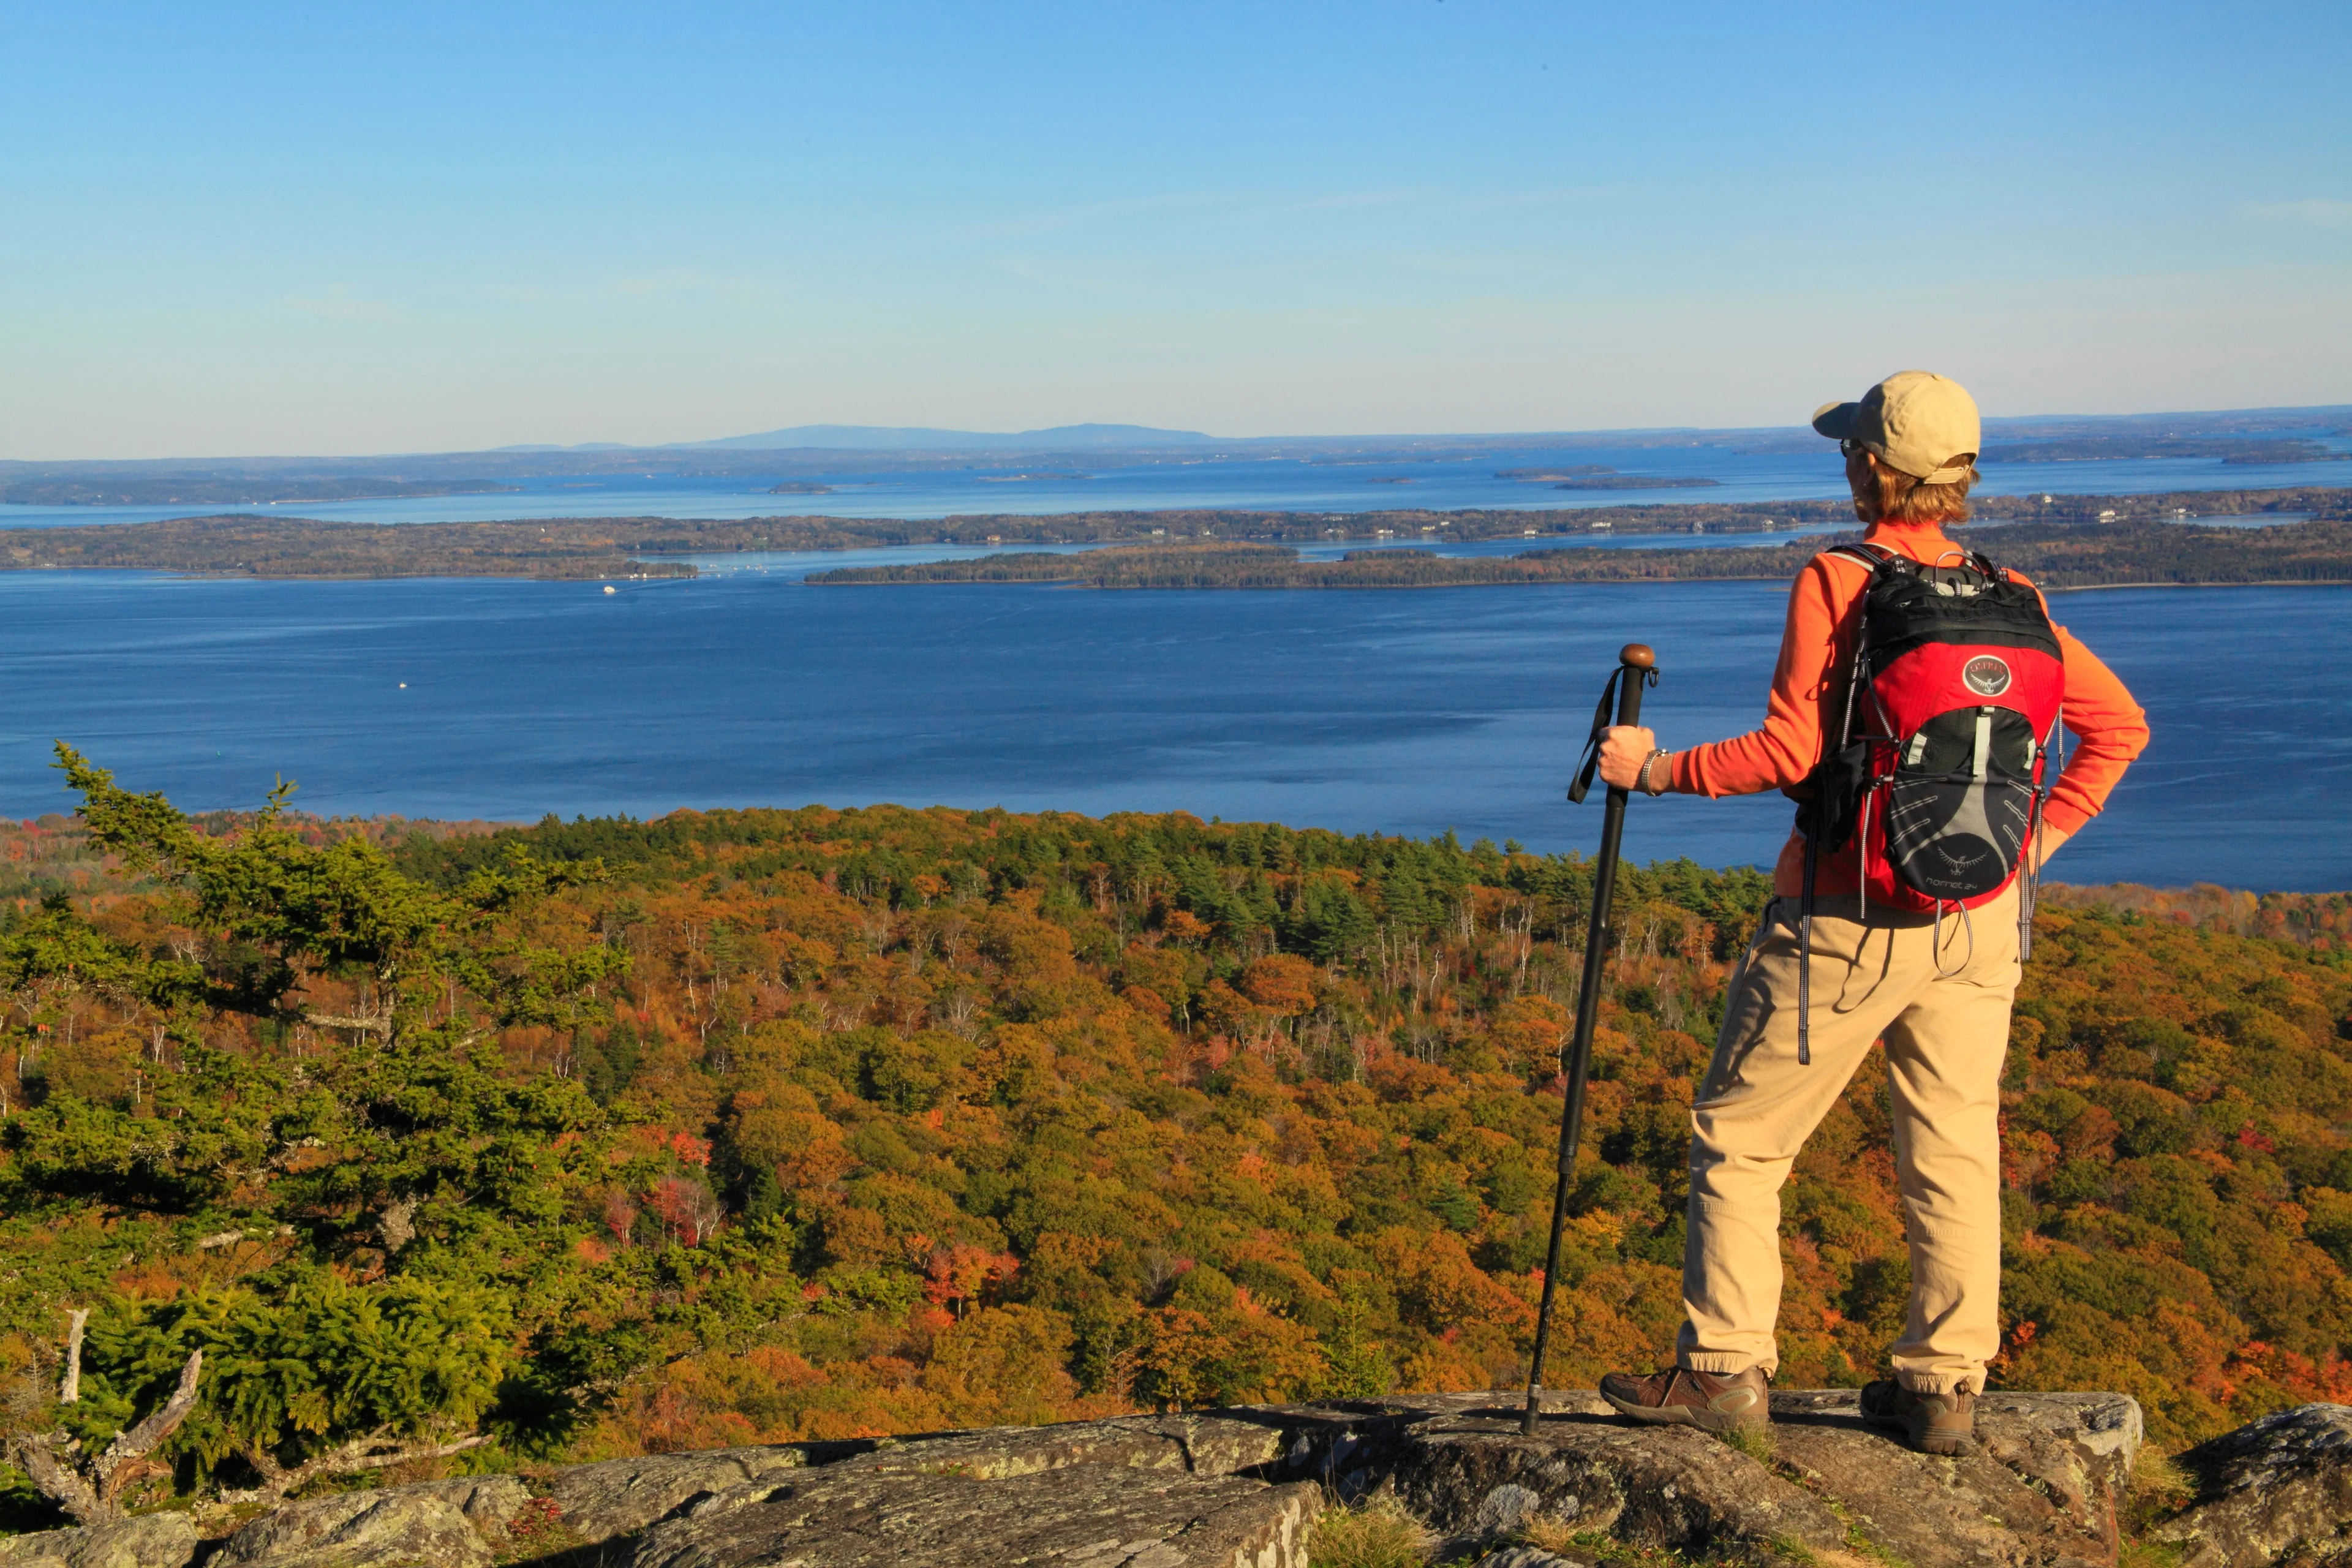 maine_bald-rock-mountain-trail_camden_view-of-peobscot-bay_pat-and-chuck-blackley_alamy-stock-photo.jpg